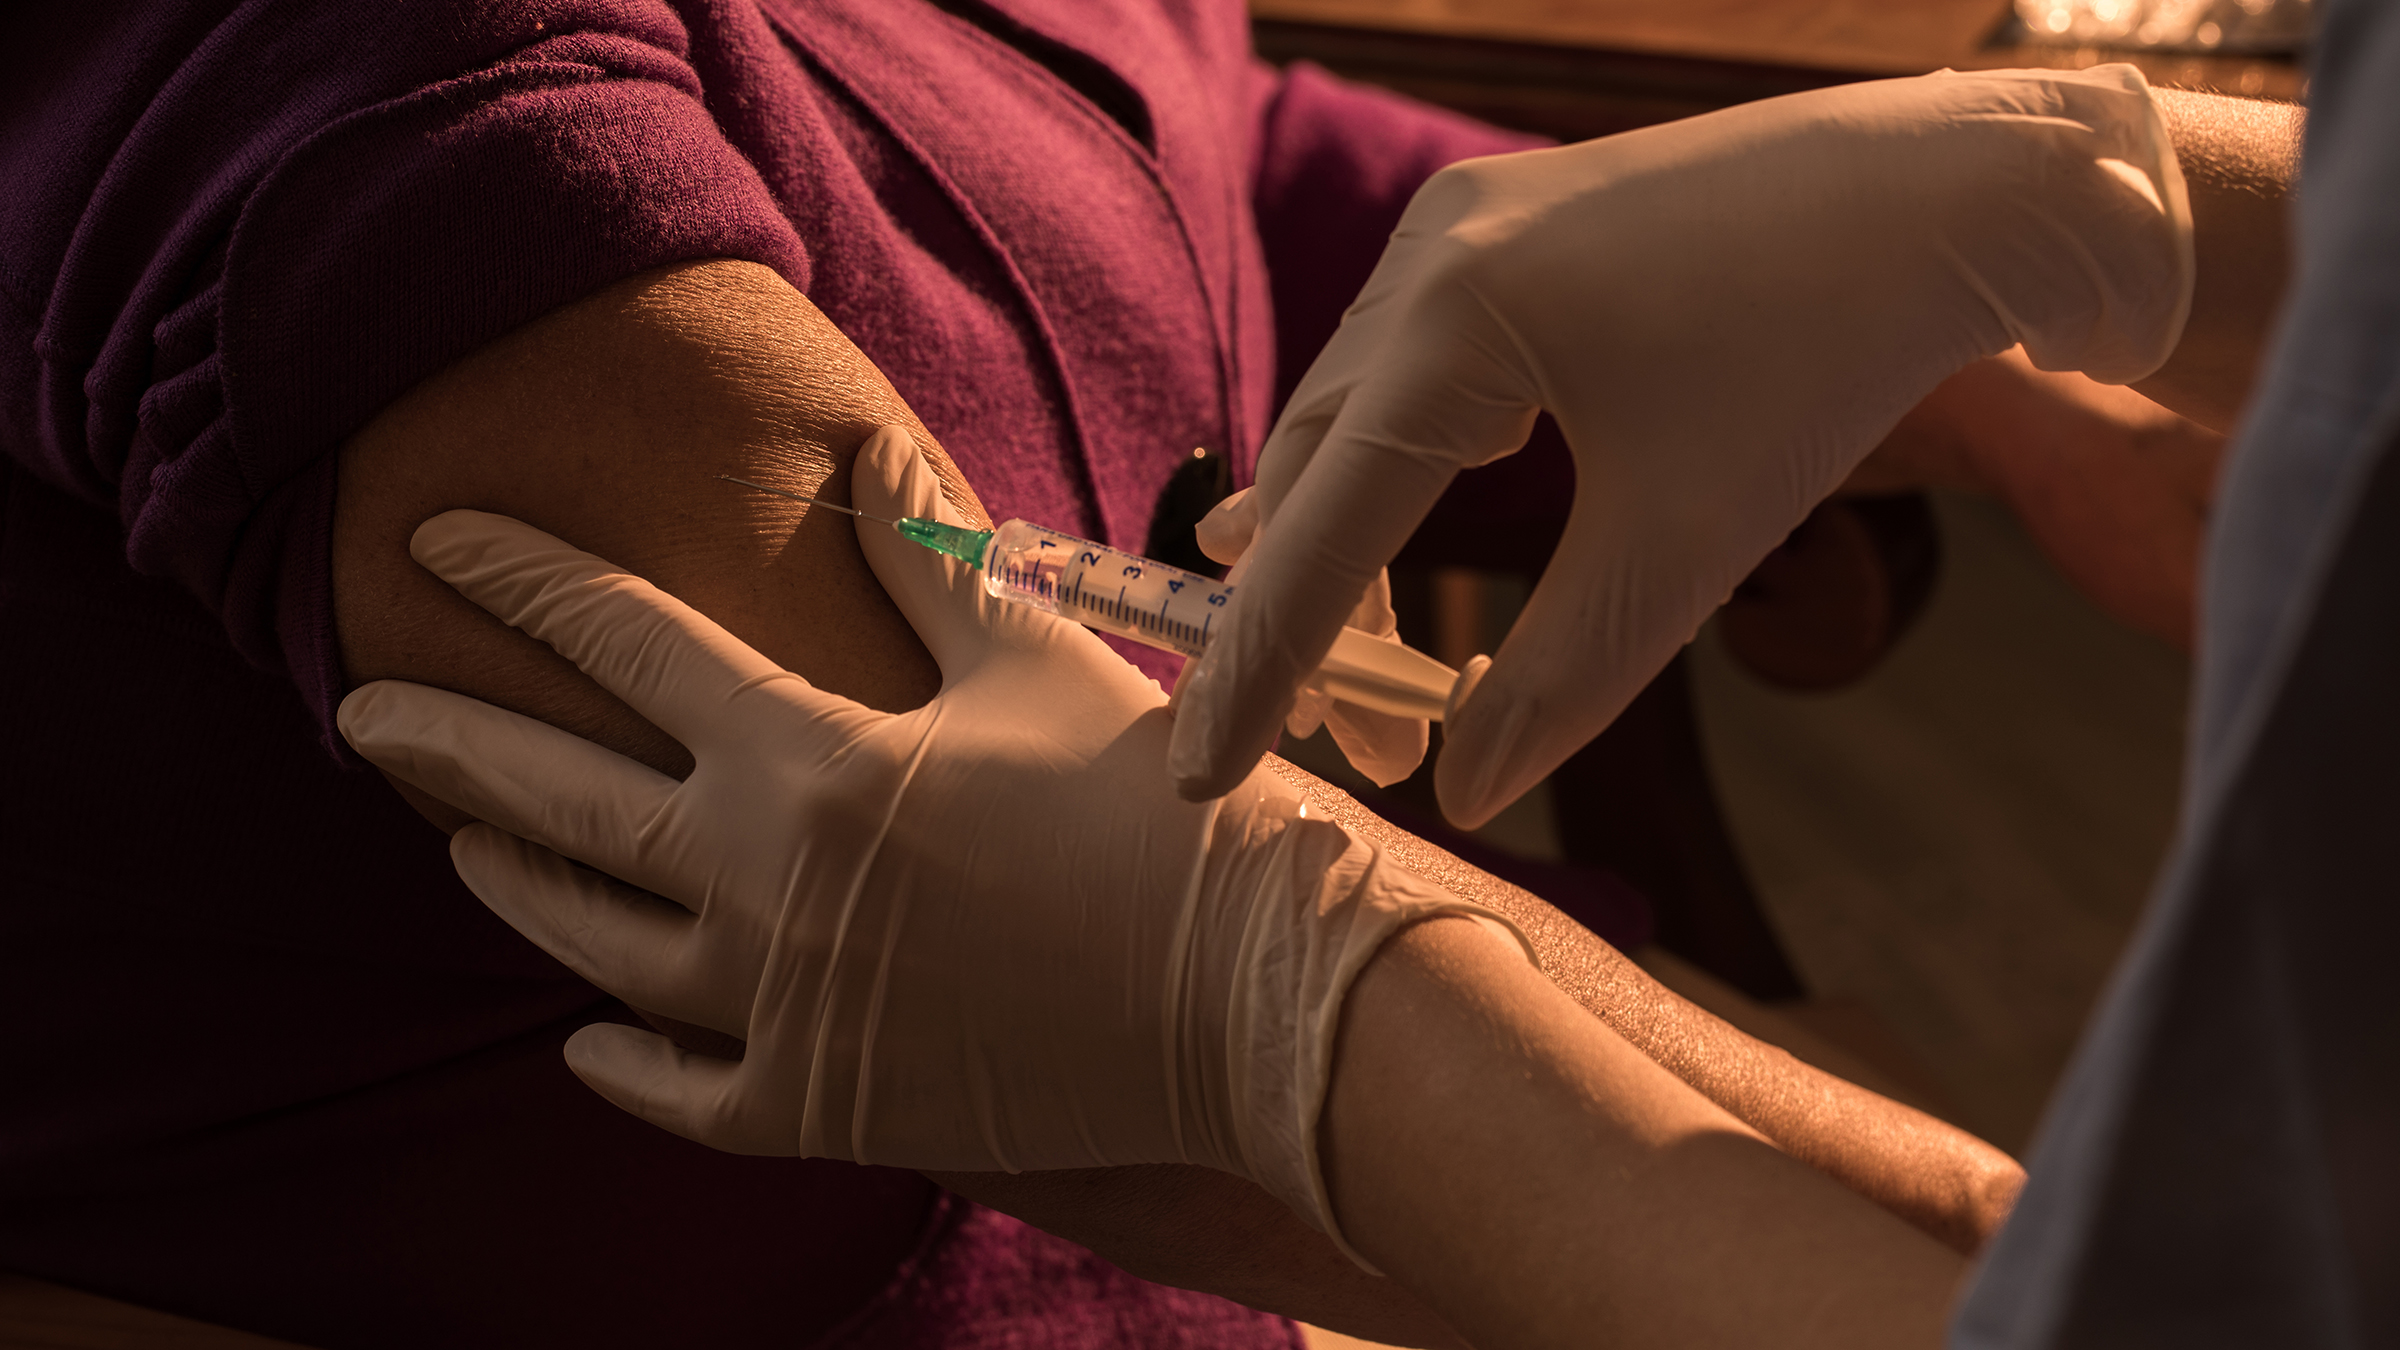 A patient receives a vaccination in the arm